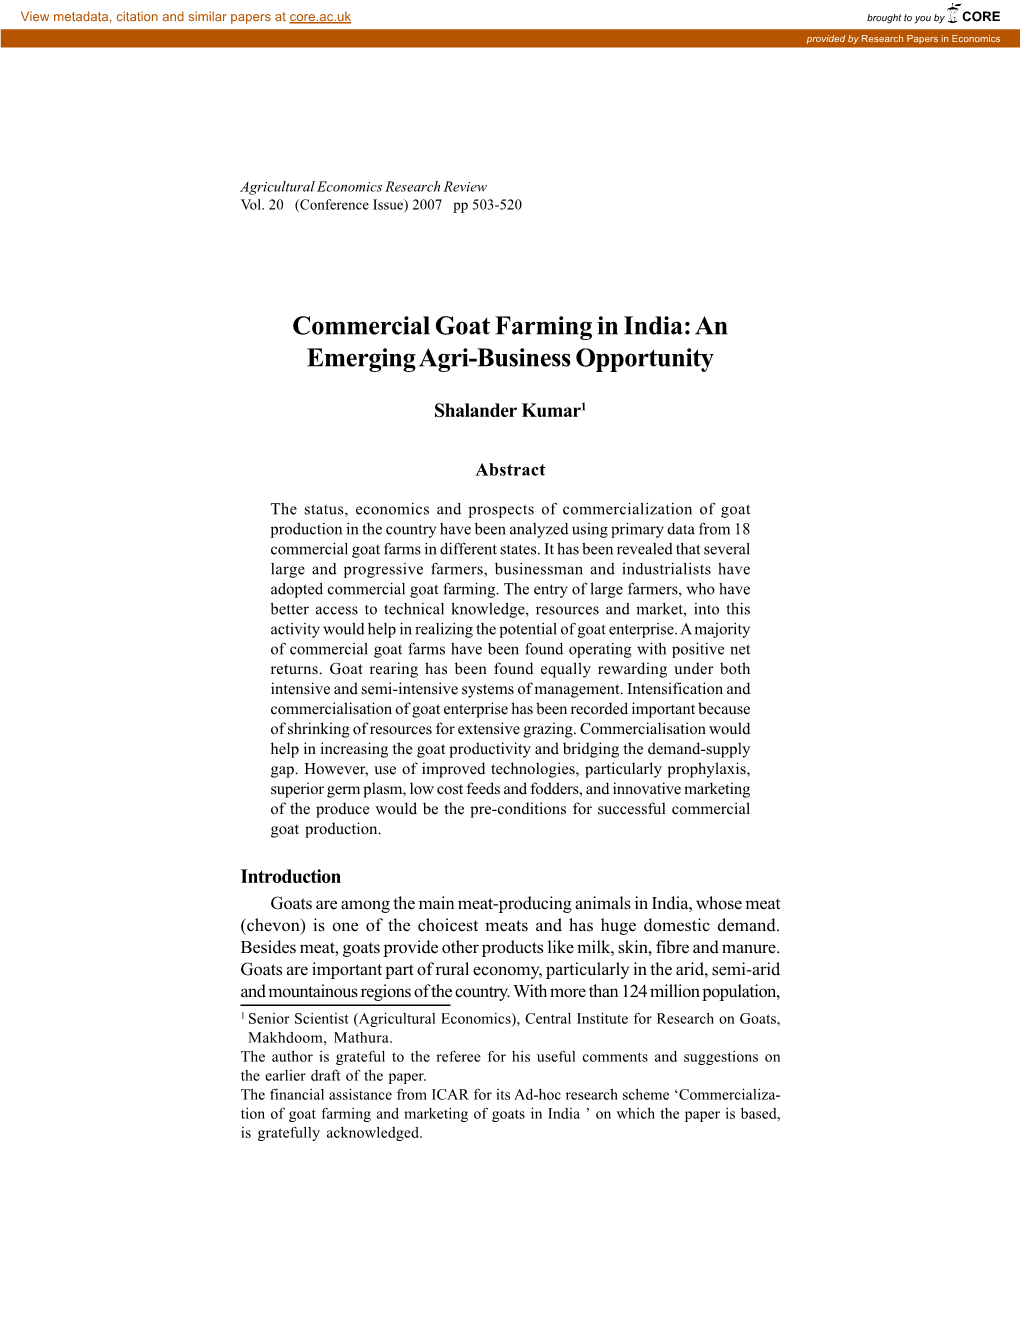 Commercial Goat Farming in India: an Emerging Agri-Business Opportunity